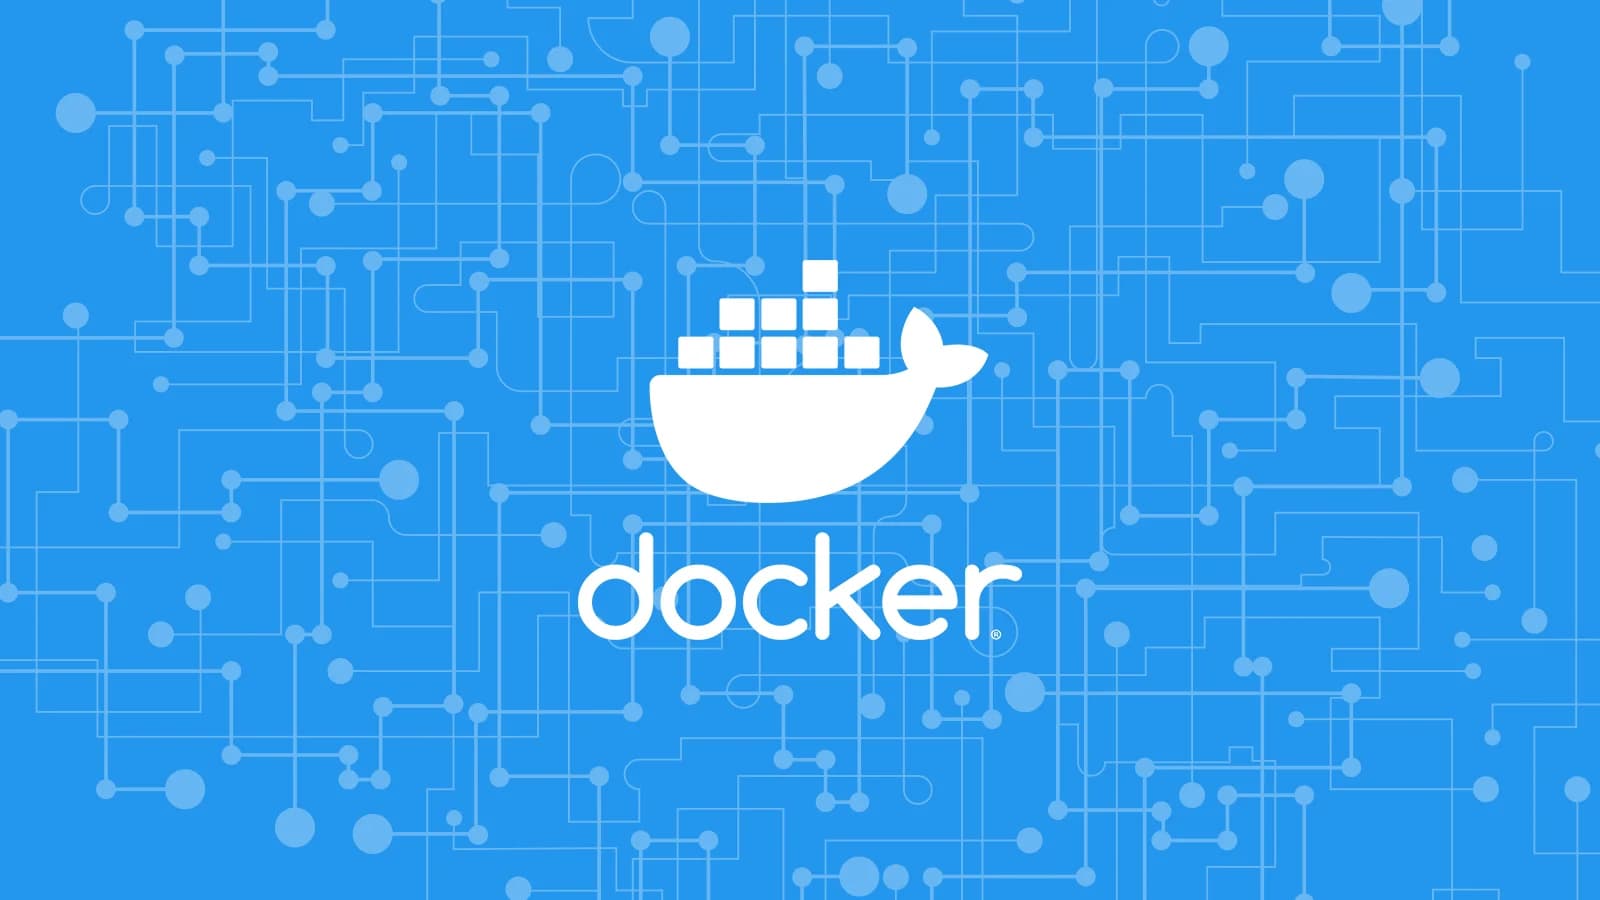 Cover Image for 【Docker】no space left on device が出ました。容量不足です